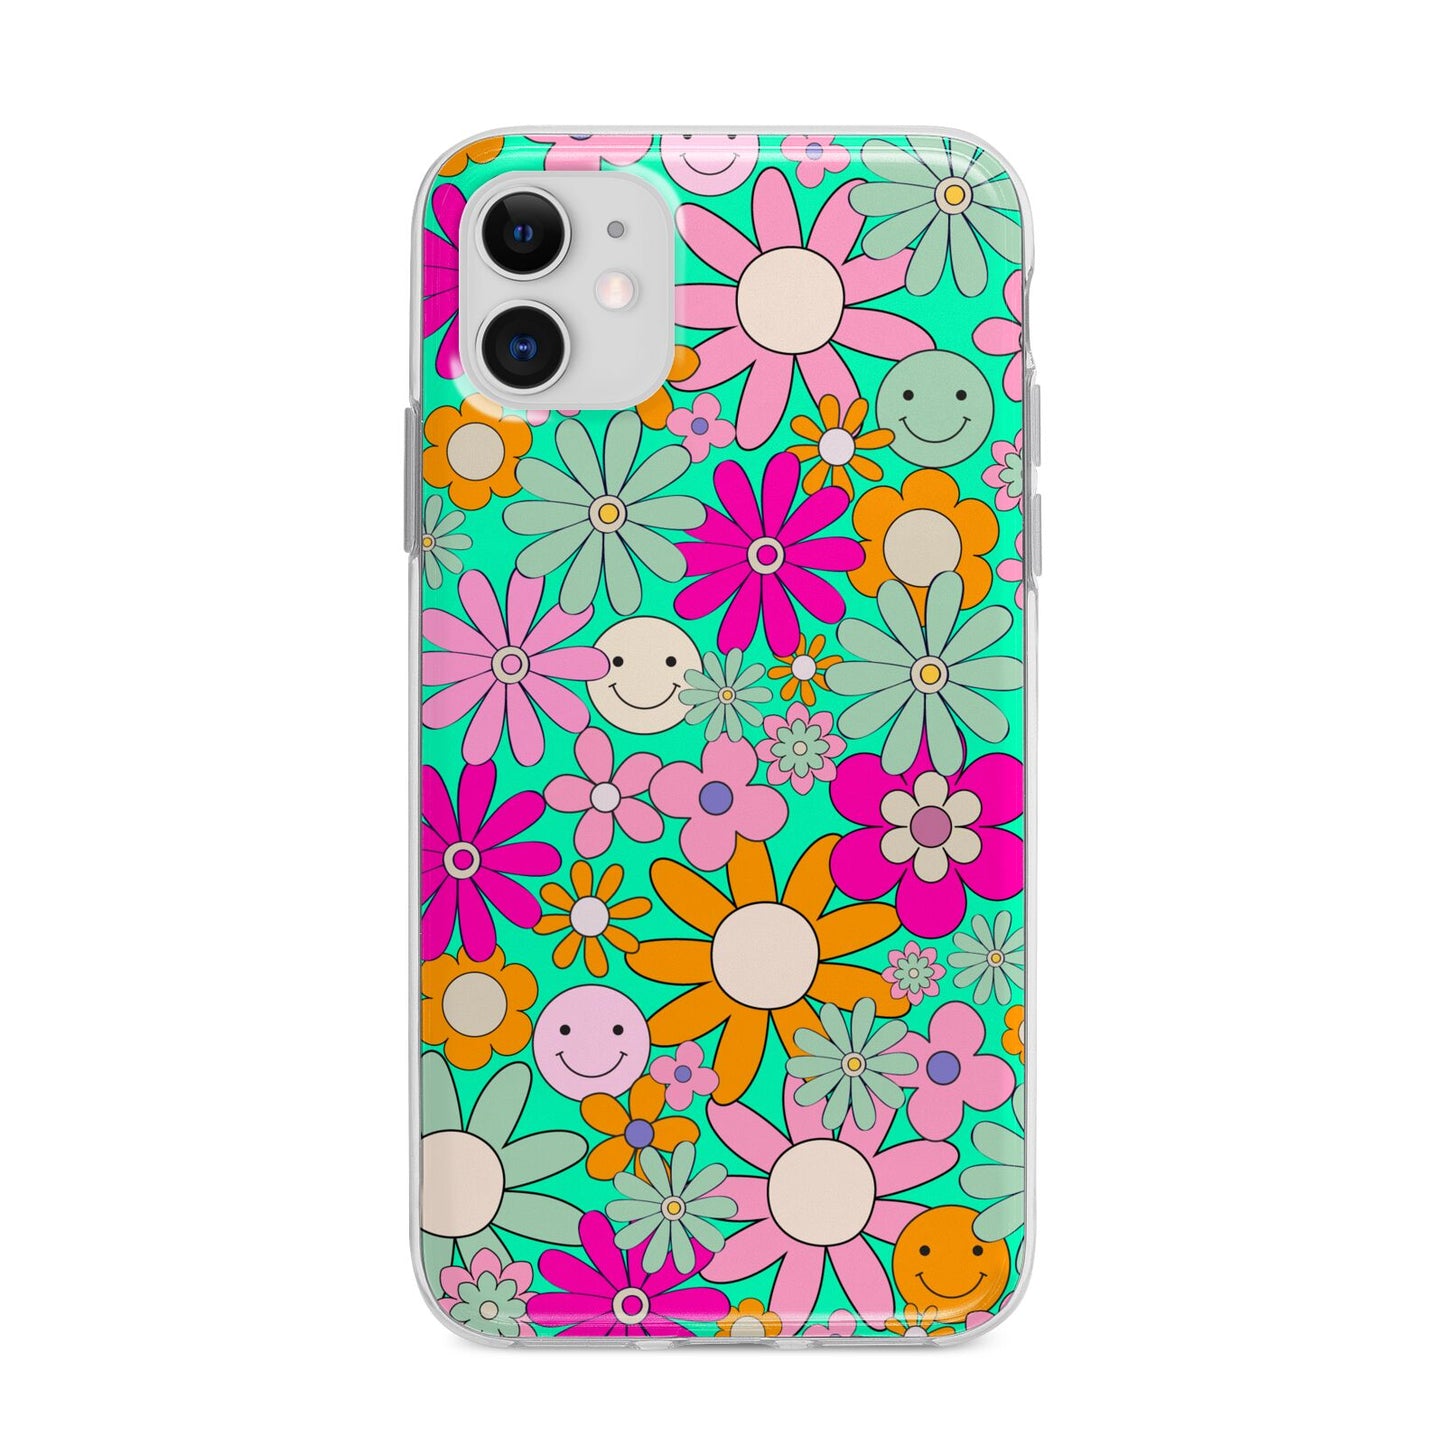 Hippy Floral Apple iPhone 11 in White with Bumper Case